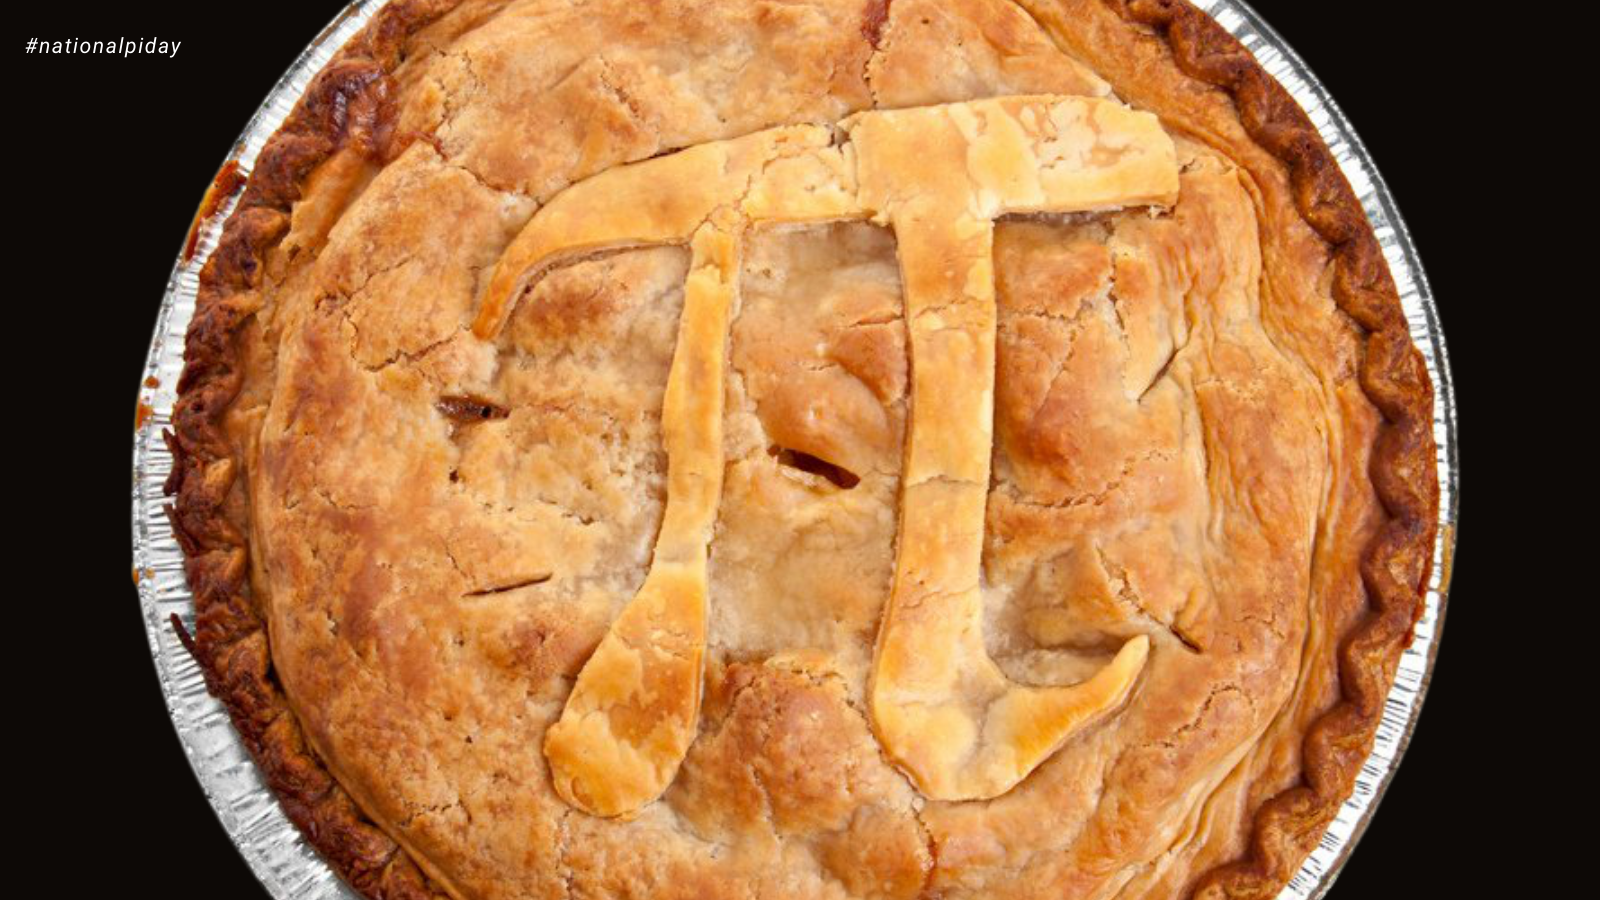 Celebrate National Pi Day with #FatMap - The Pie Edition!